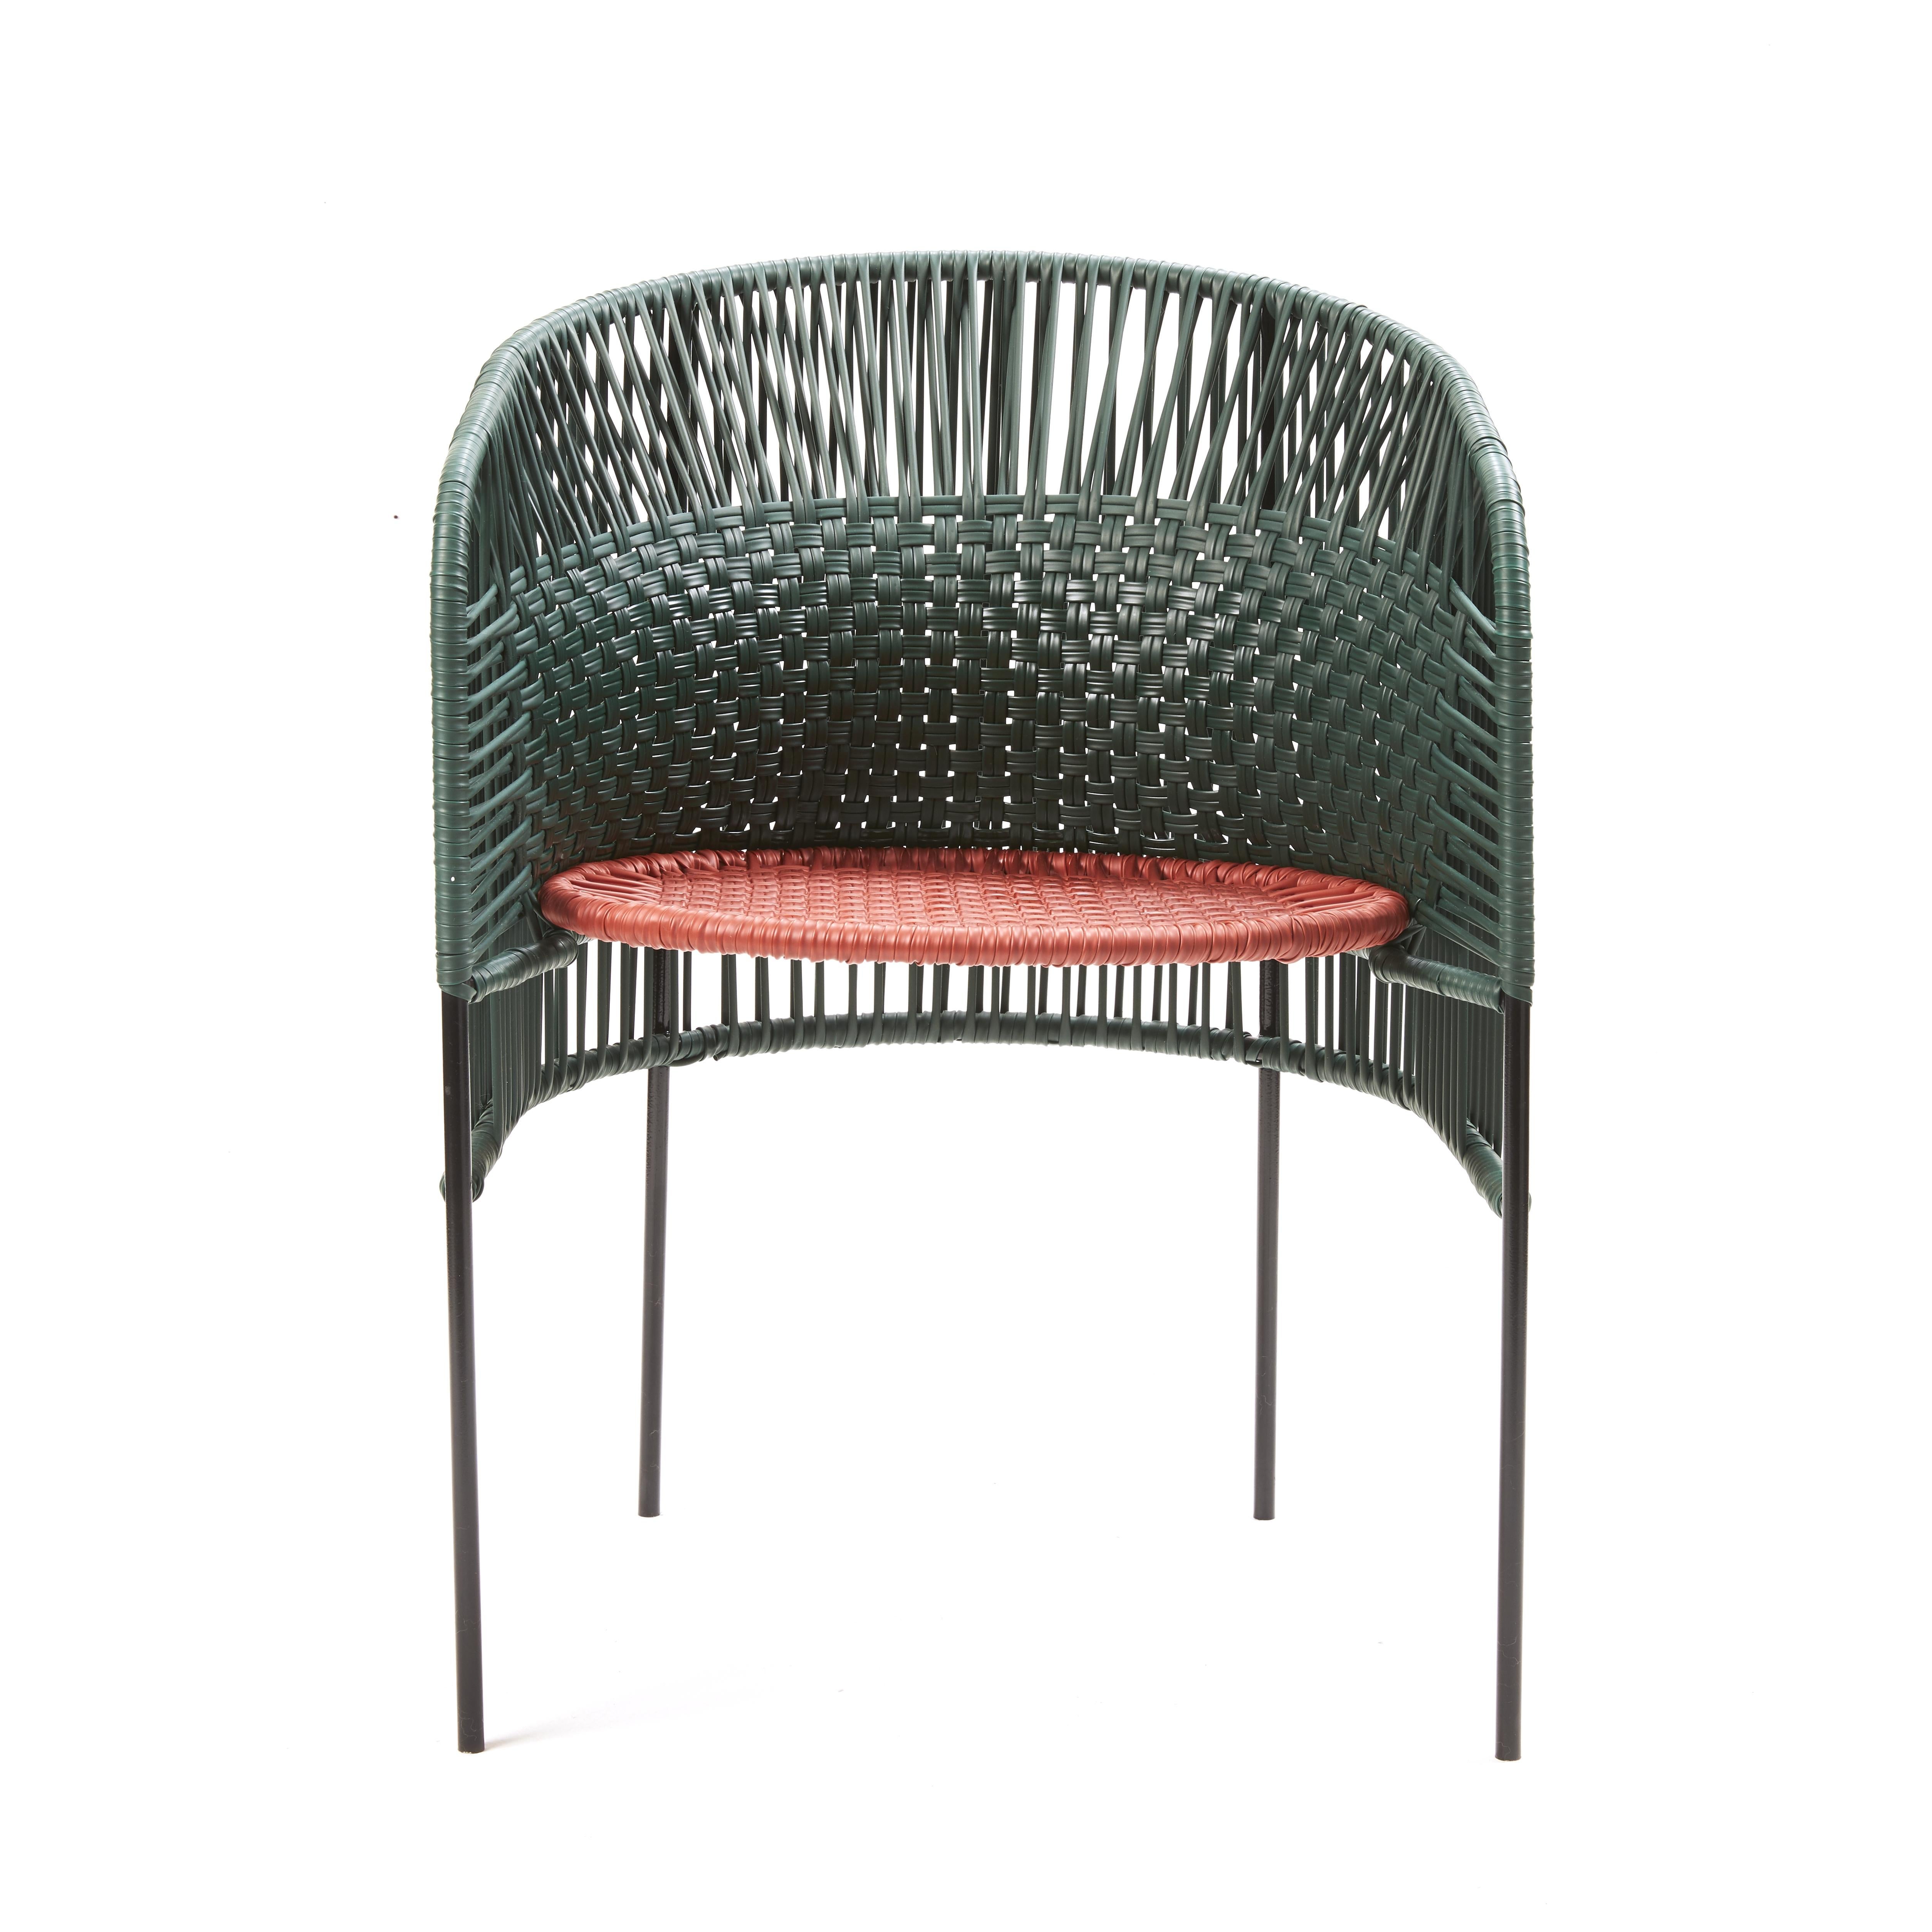 Set of 2 green Caribe chic dining chair by Sebastian Herkner.
Materials: galvanized and powder-coated tubular steel. PVC strings are made from recycled plastic.
Technique: made from recycled plastic and weaved by local craftspeople in Colombia.